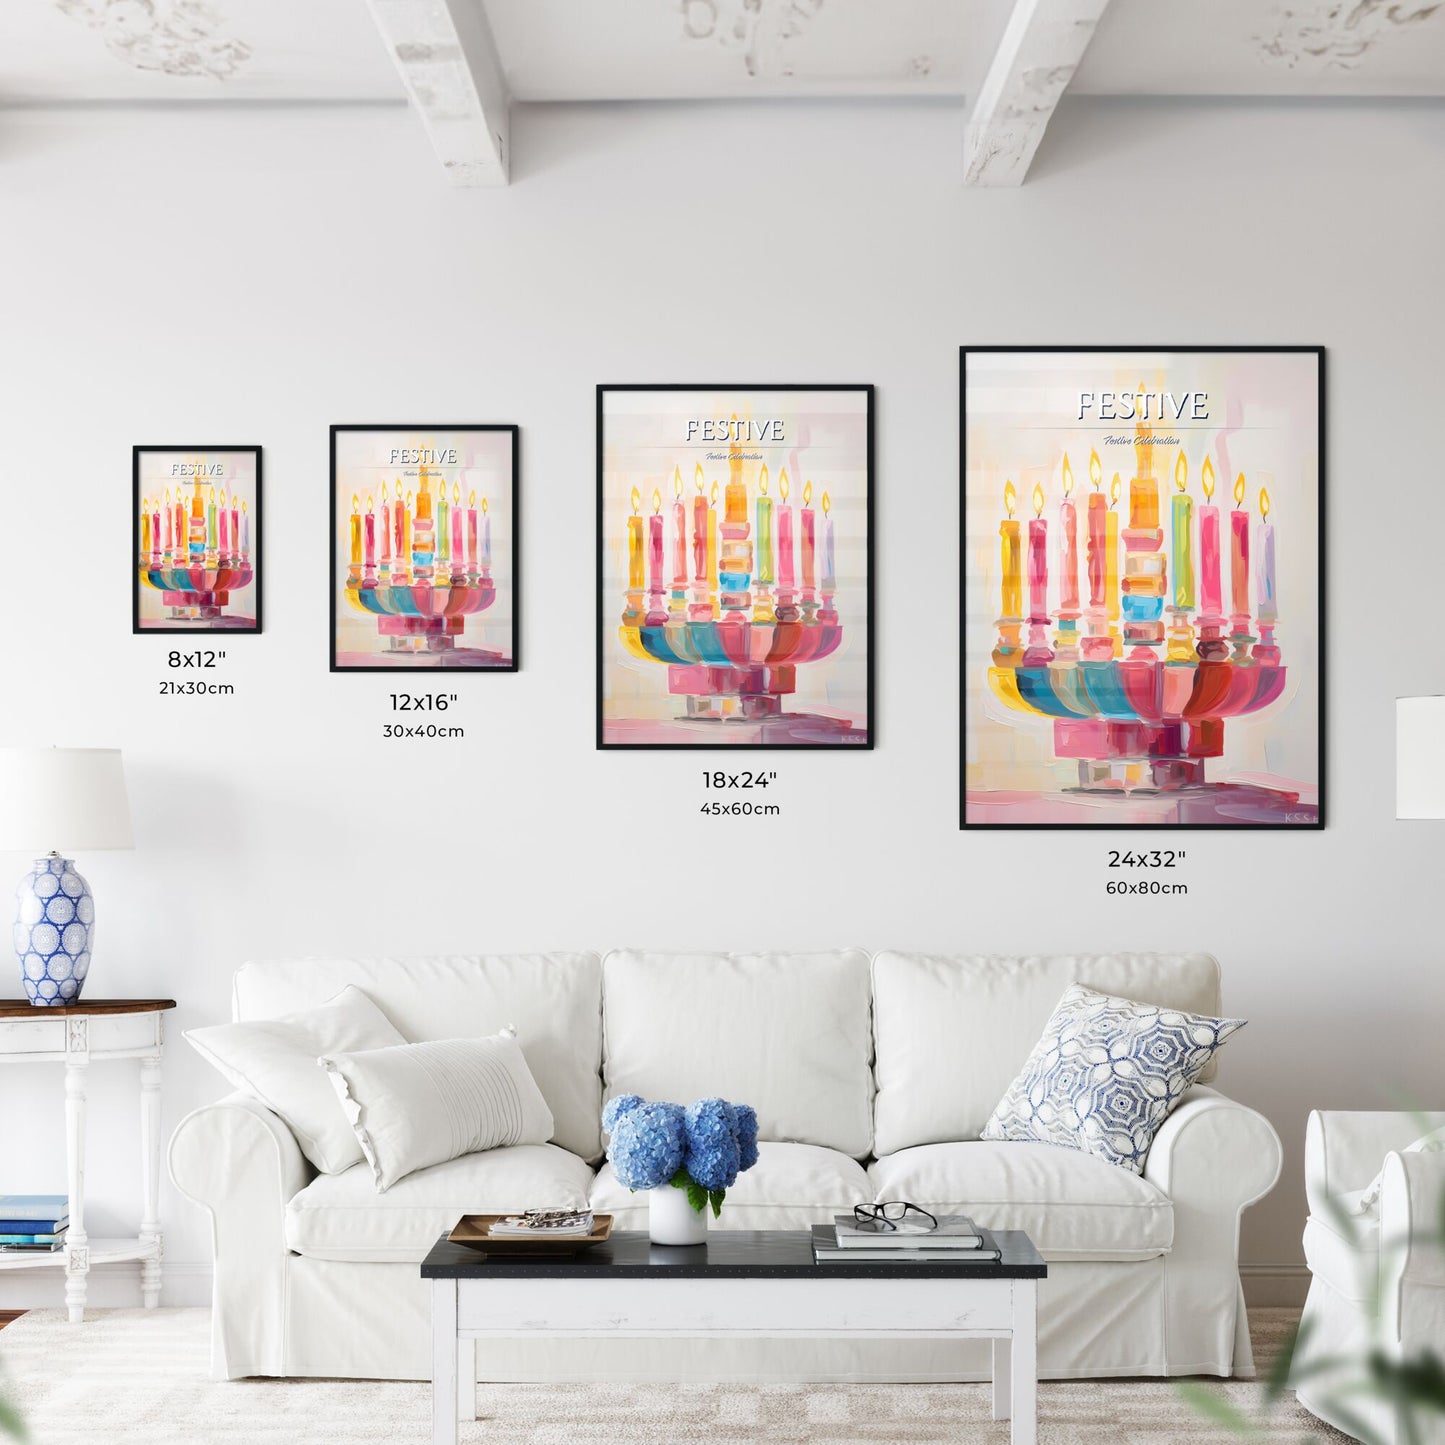 A Poster of a colorful menorah painted on white - A Painting Of A Menorah With Lit Candles Default Title